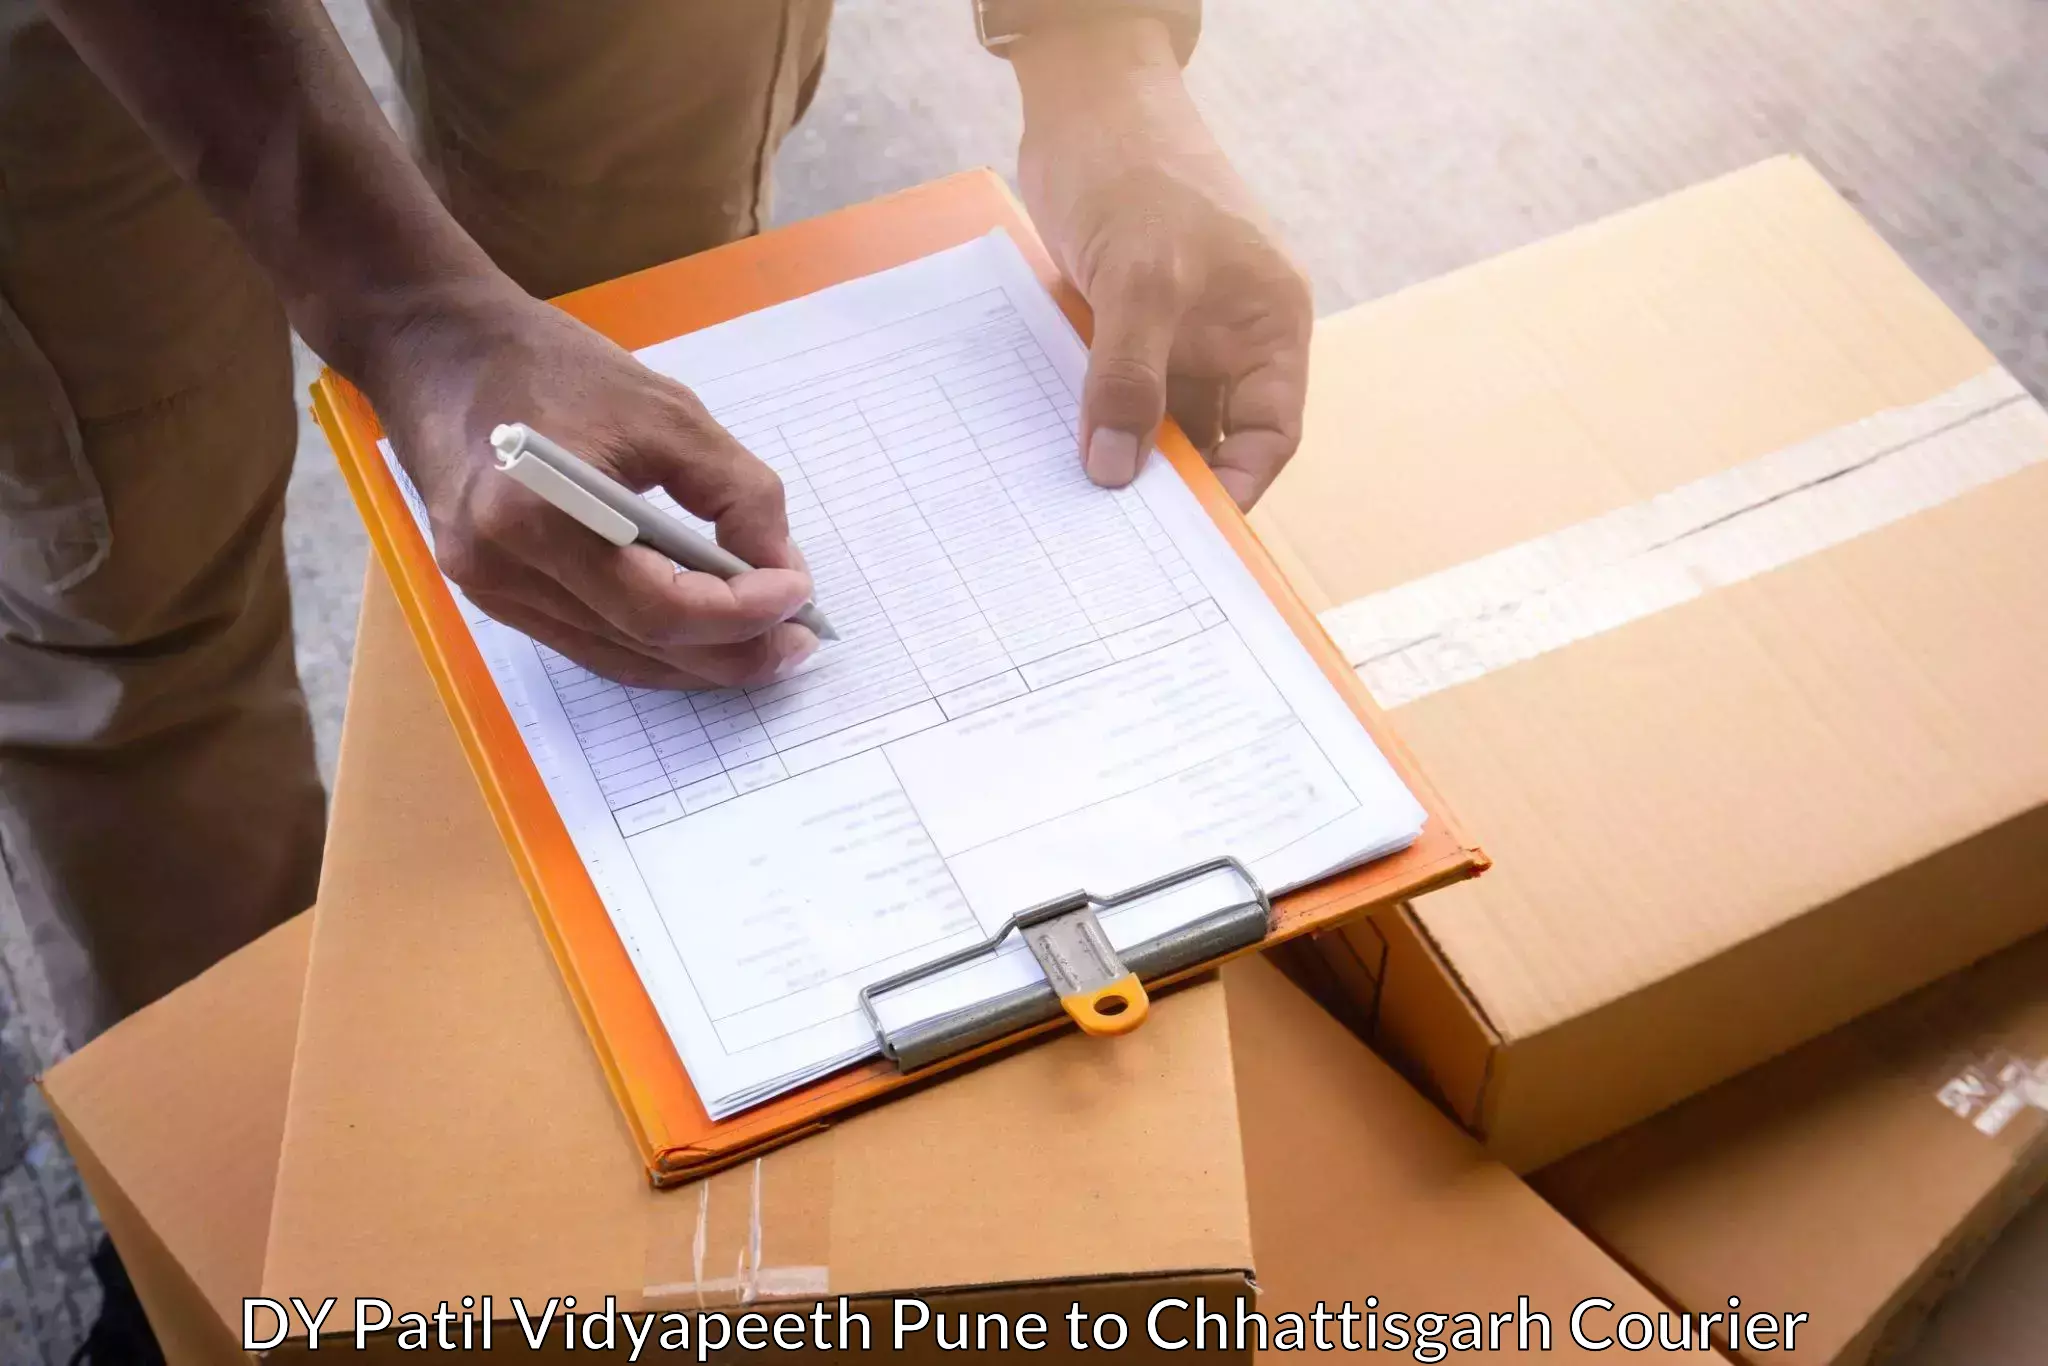 Courier service partnerships in DY Patil Vidyapeeth Pune to Sirpur